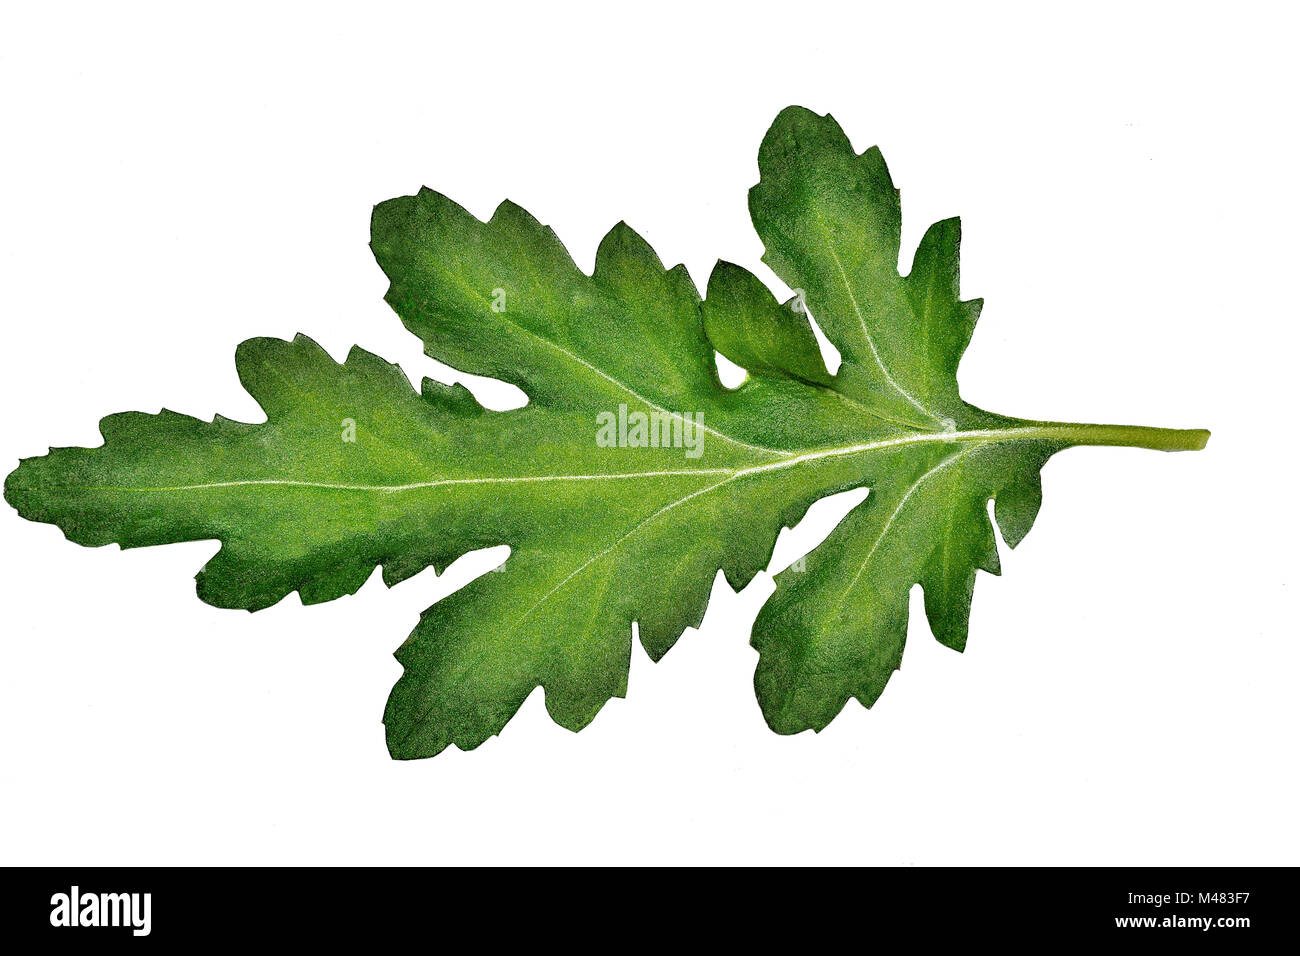 Carved beautiful chrysanthemum leaf closeup isolated on white background Stock Photo